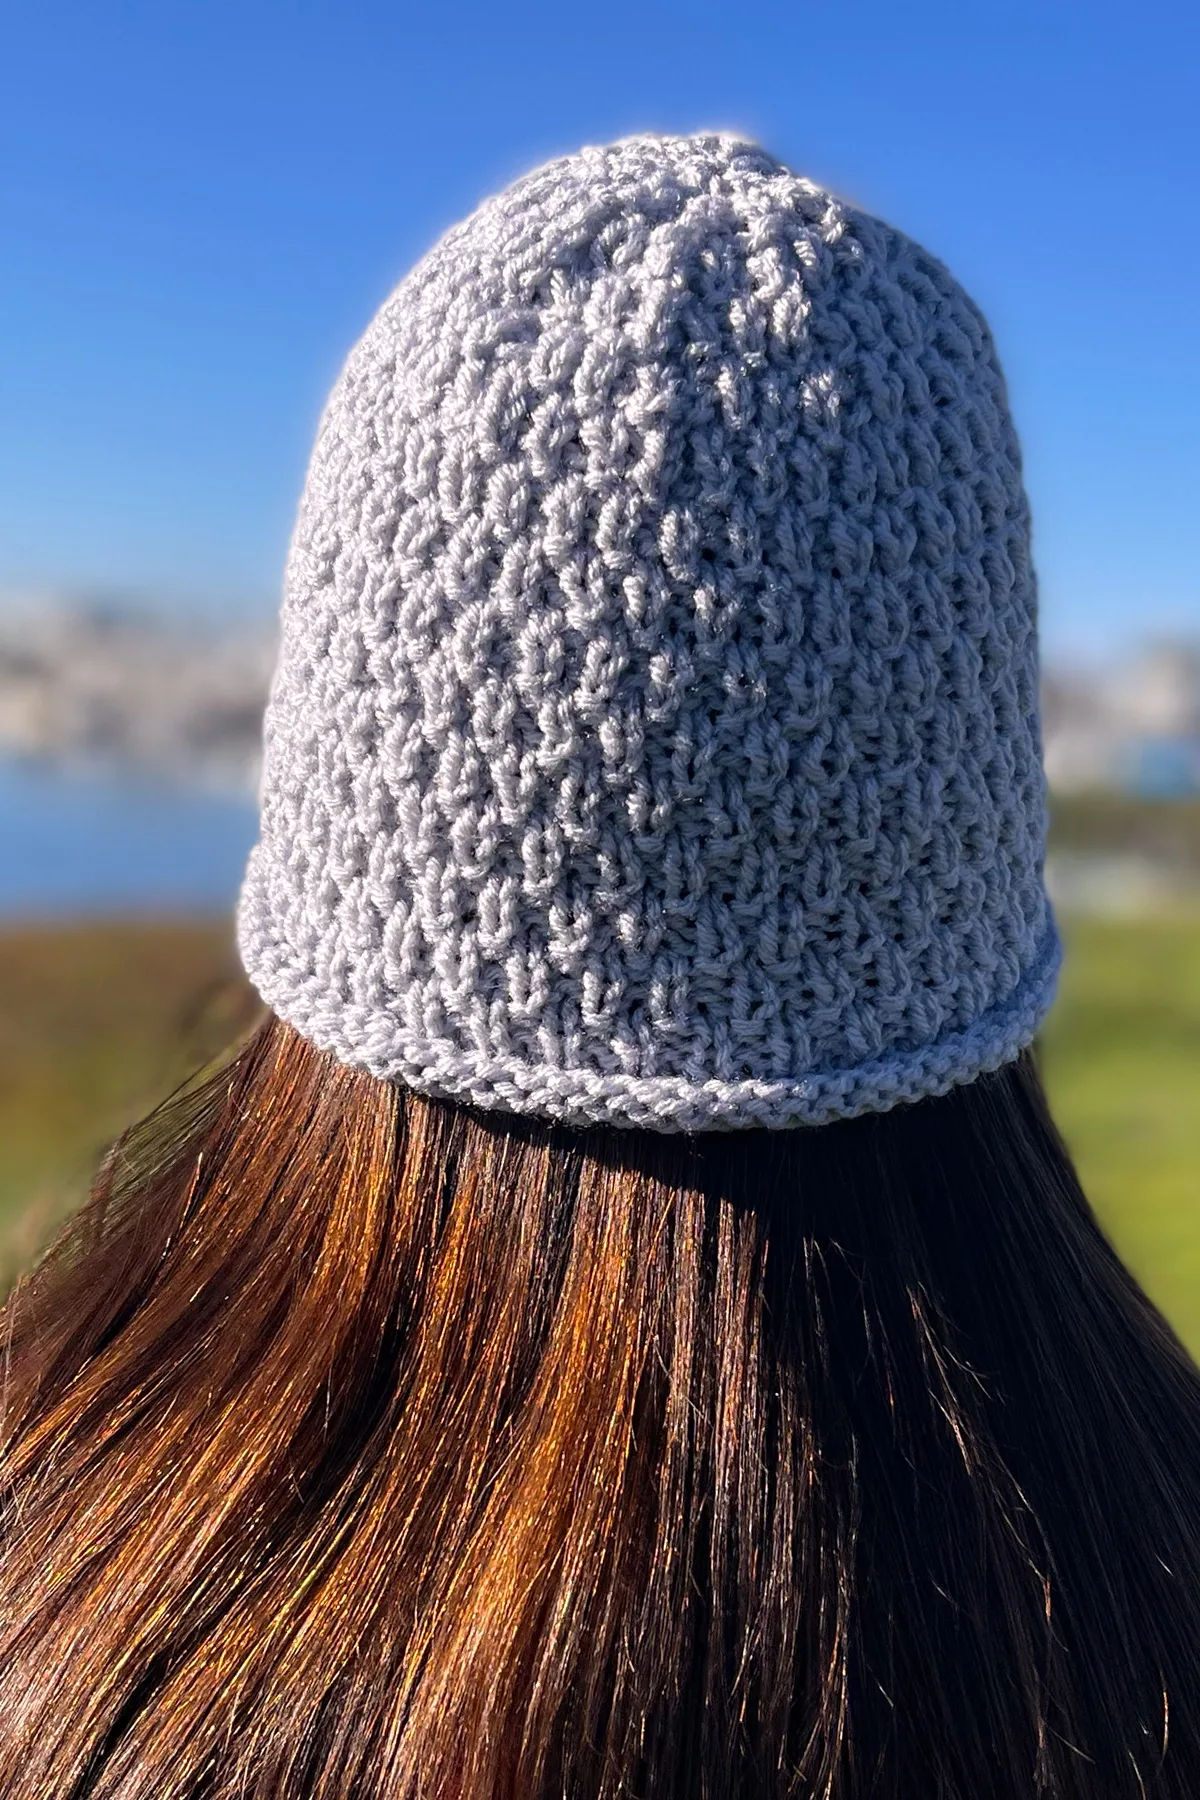 Knitted hat in Swift Stitch pattern texture with grey color yarn modeled on woman's head.